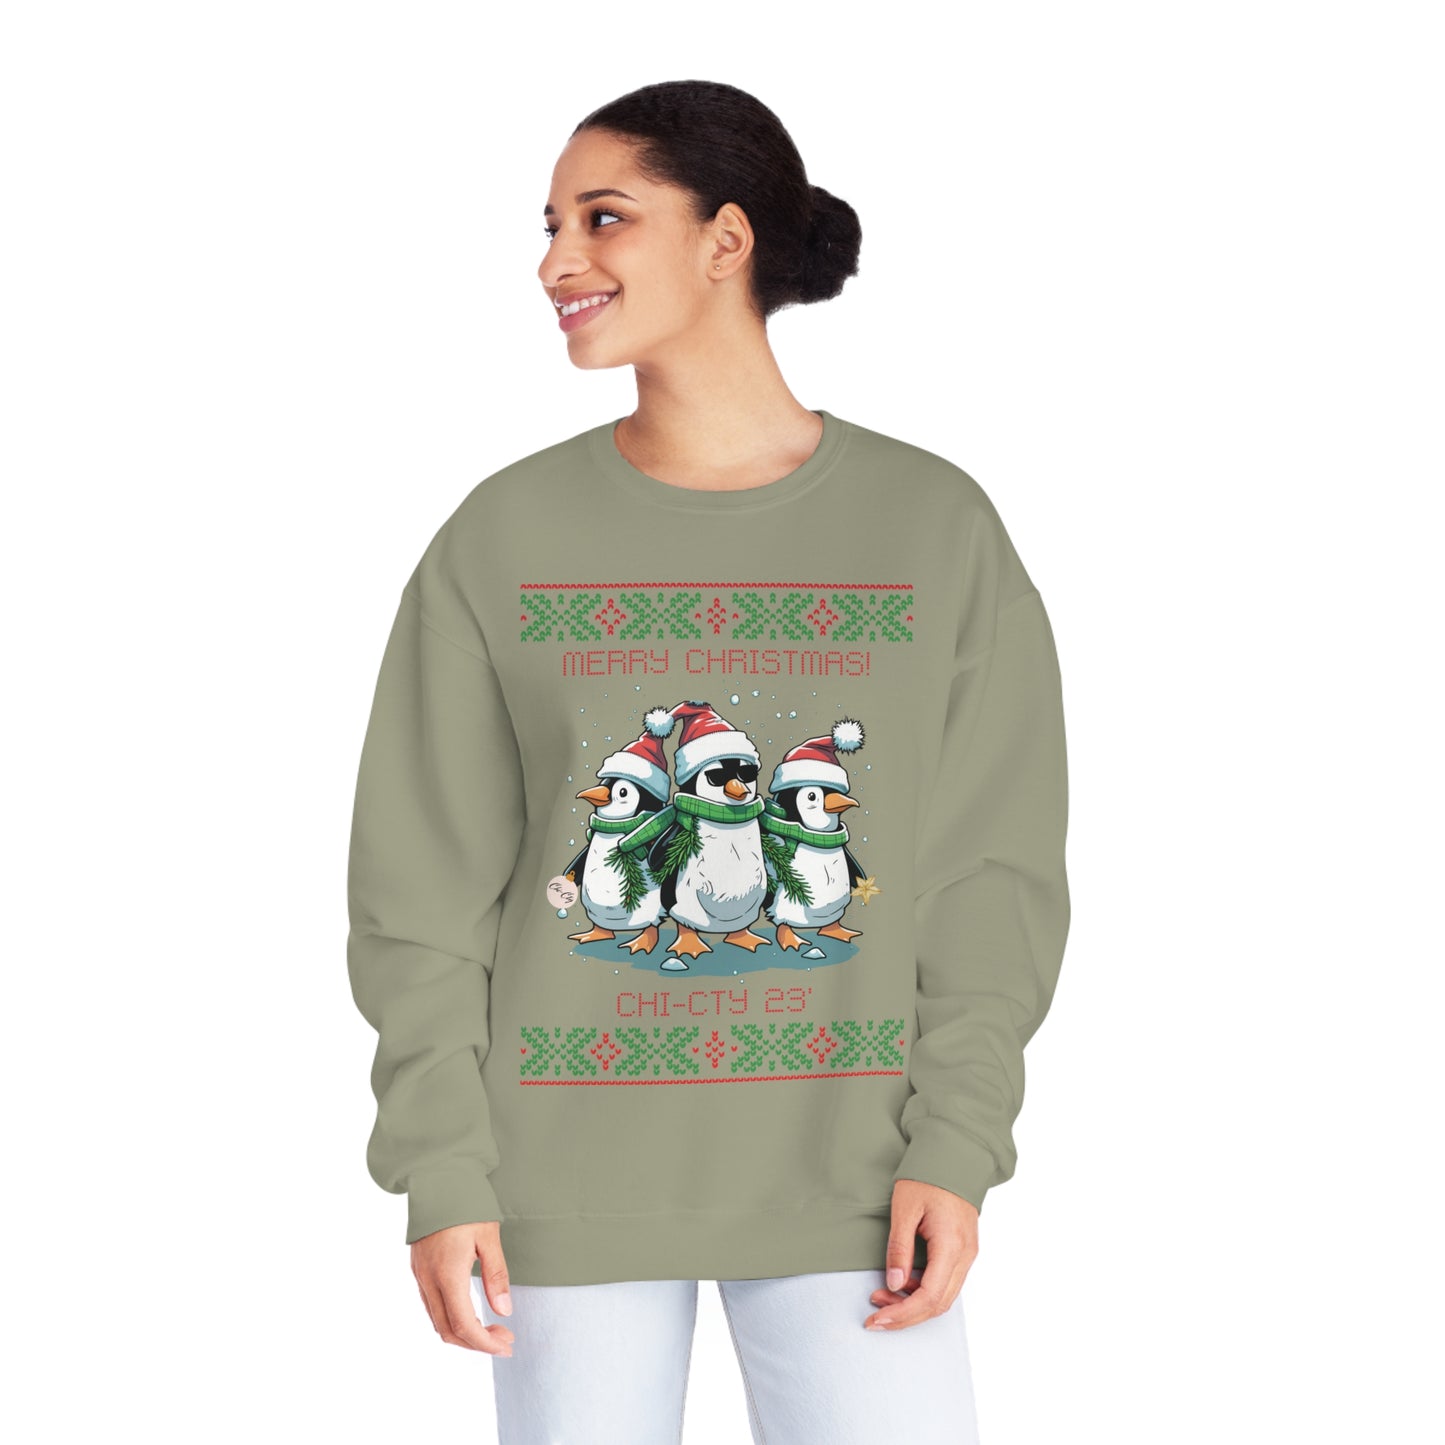 CHI-CTY - Christmas Sweater 23'